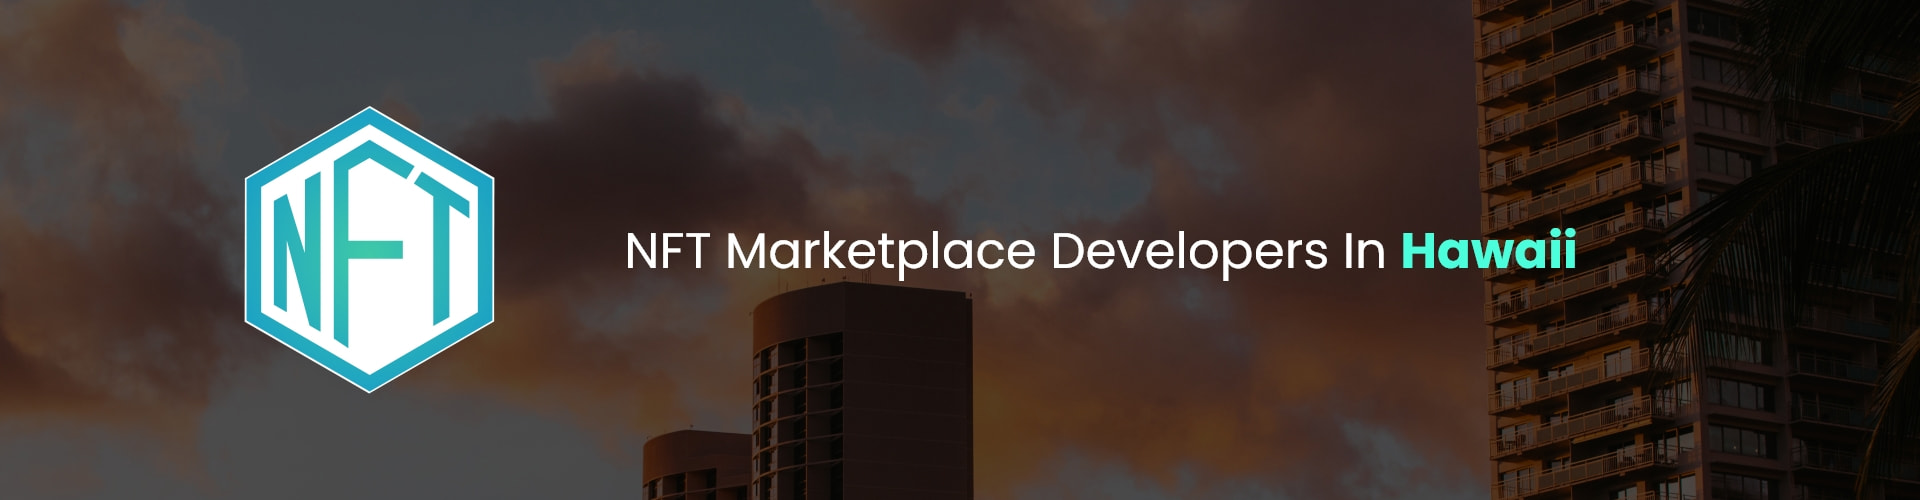 hire nft marketplace developers in hawaii